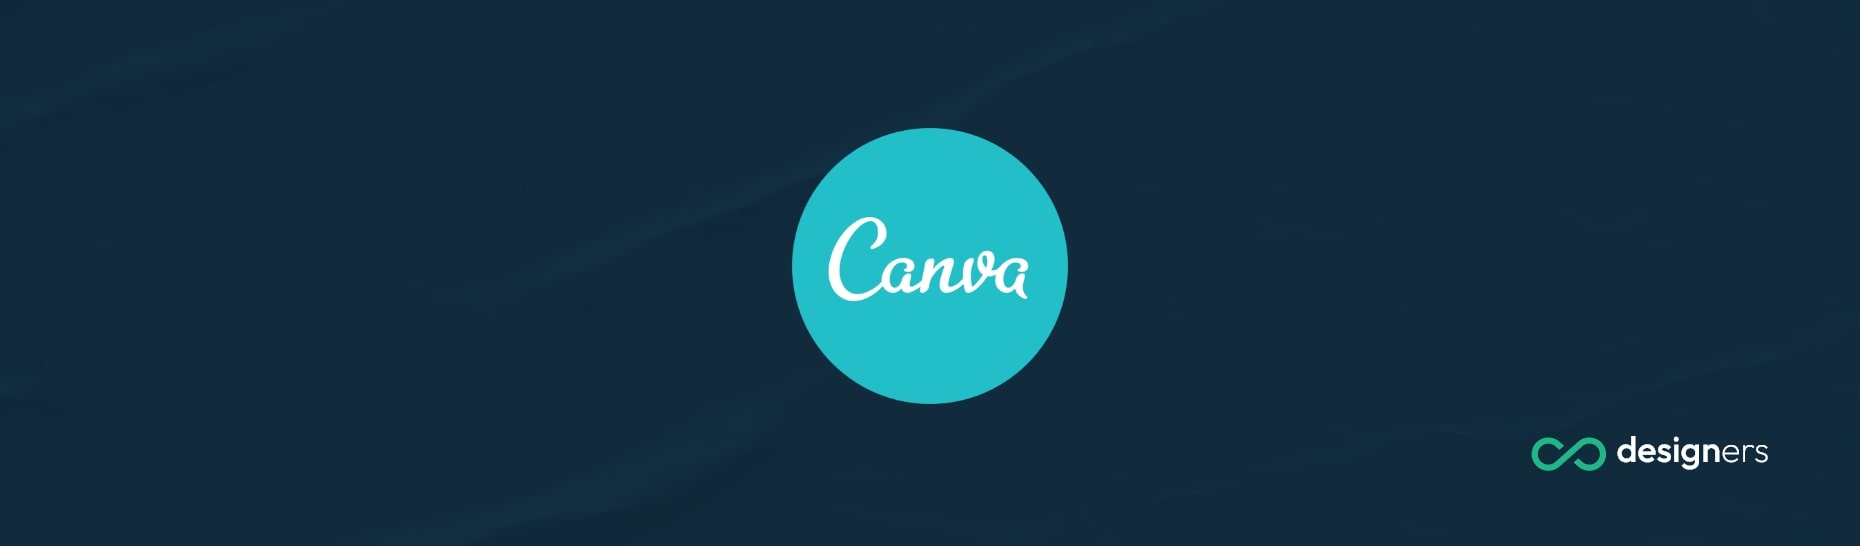 Does Canva Work on Chromebook?